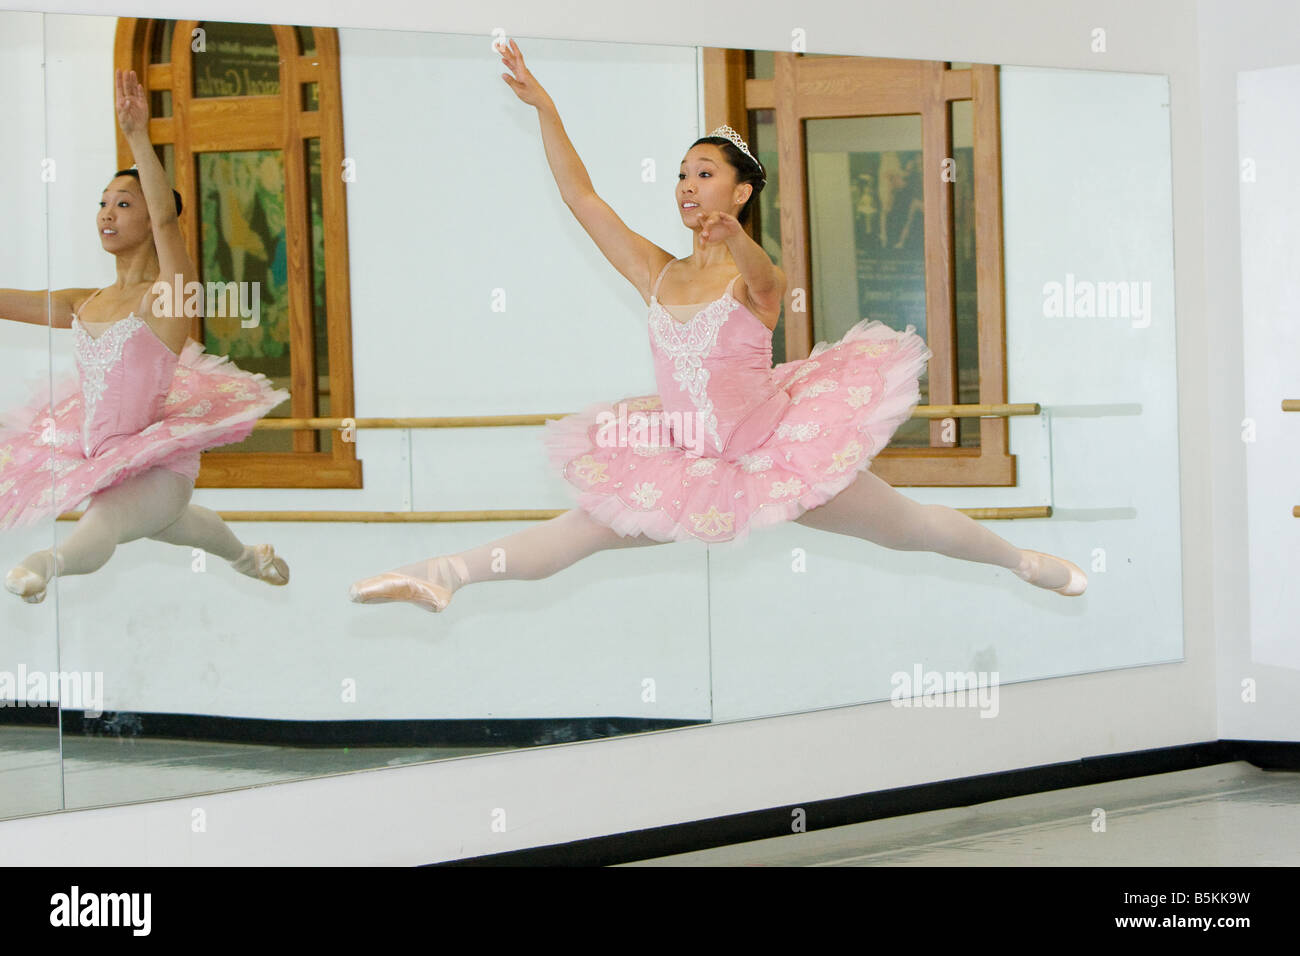 A ballerina in a pink tutu jumping through the air in front of a mirror. Stock Photo